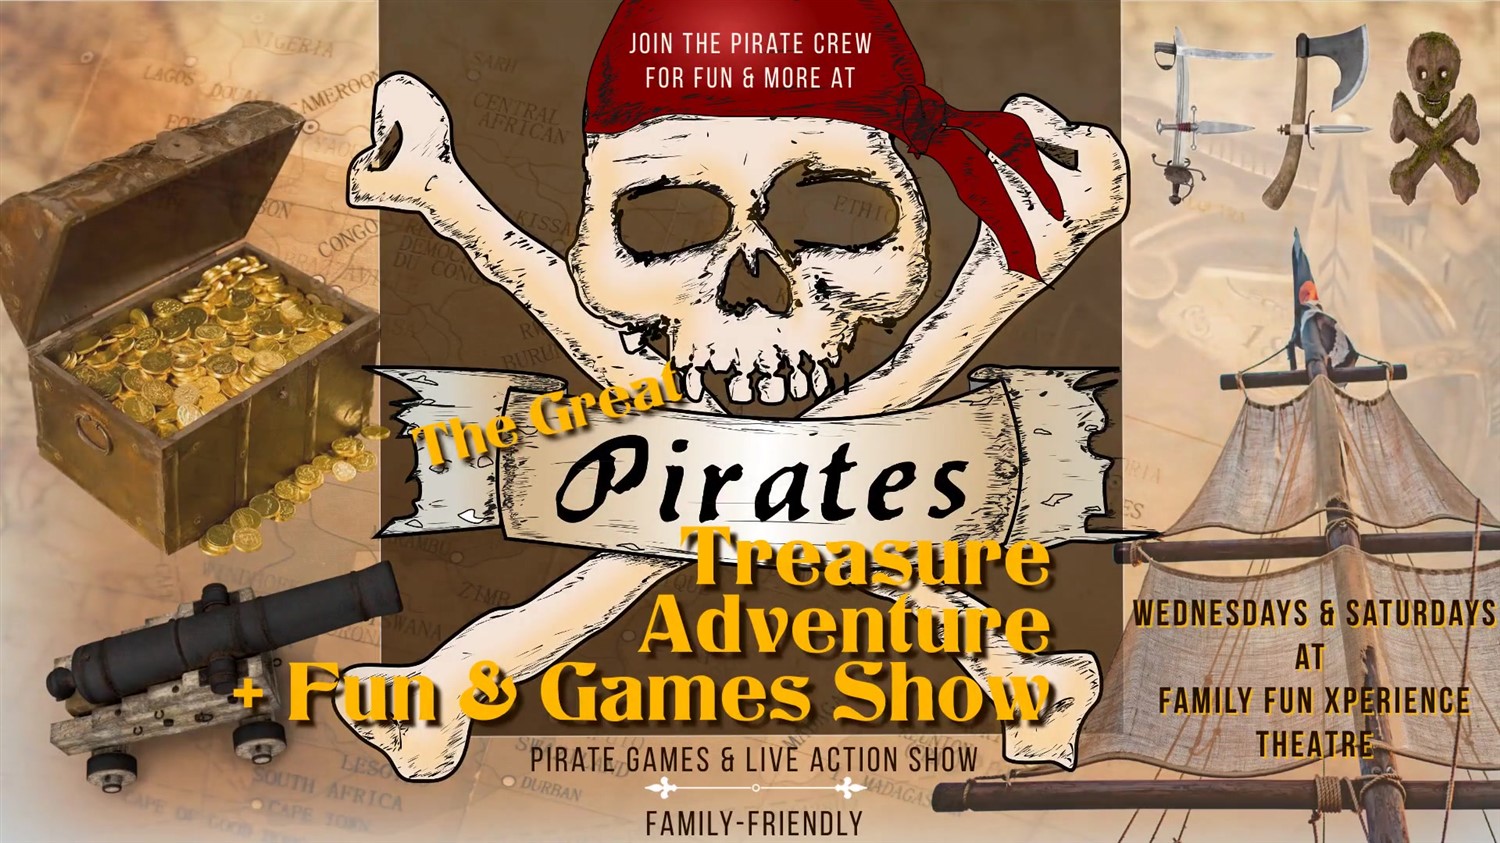 PIRATE TREASURE ADVENTURE SHOW Fun for all ages...aaarrrgh! on oct. 08, 19:00@FFX Theatre - Pick a seat, Buy tickets and Get information on Family Fun Xperience tickets.ffxshow.org